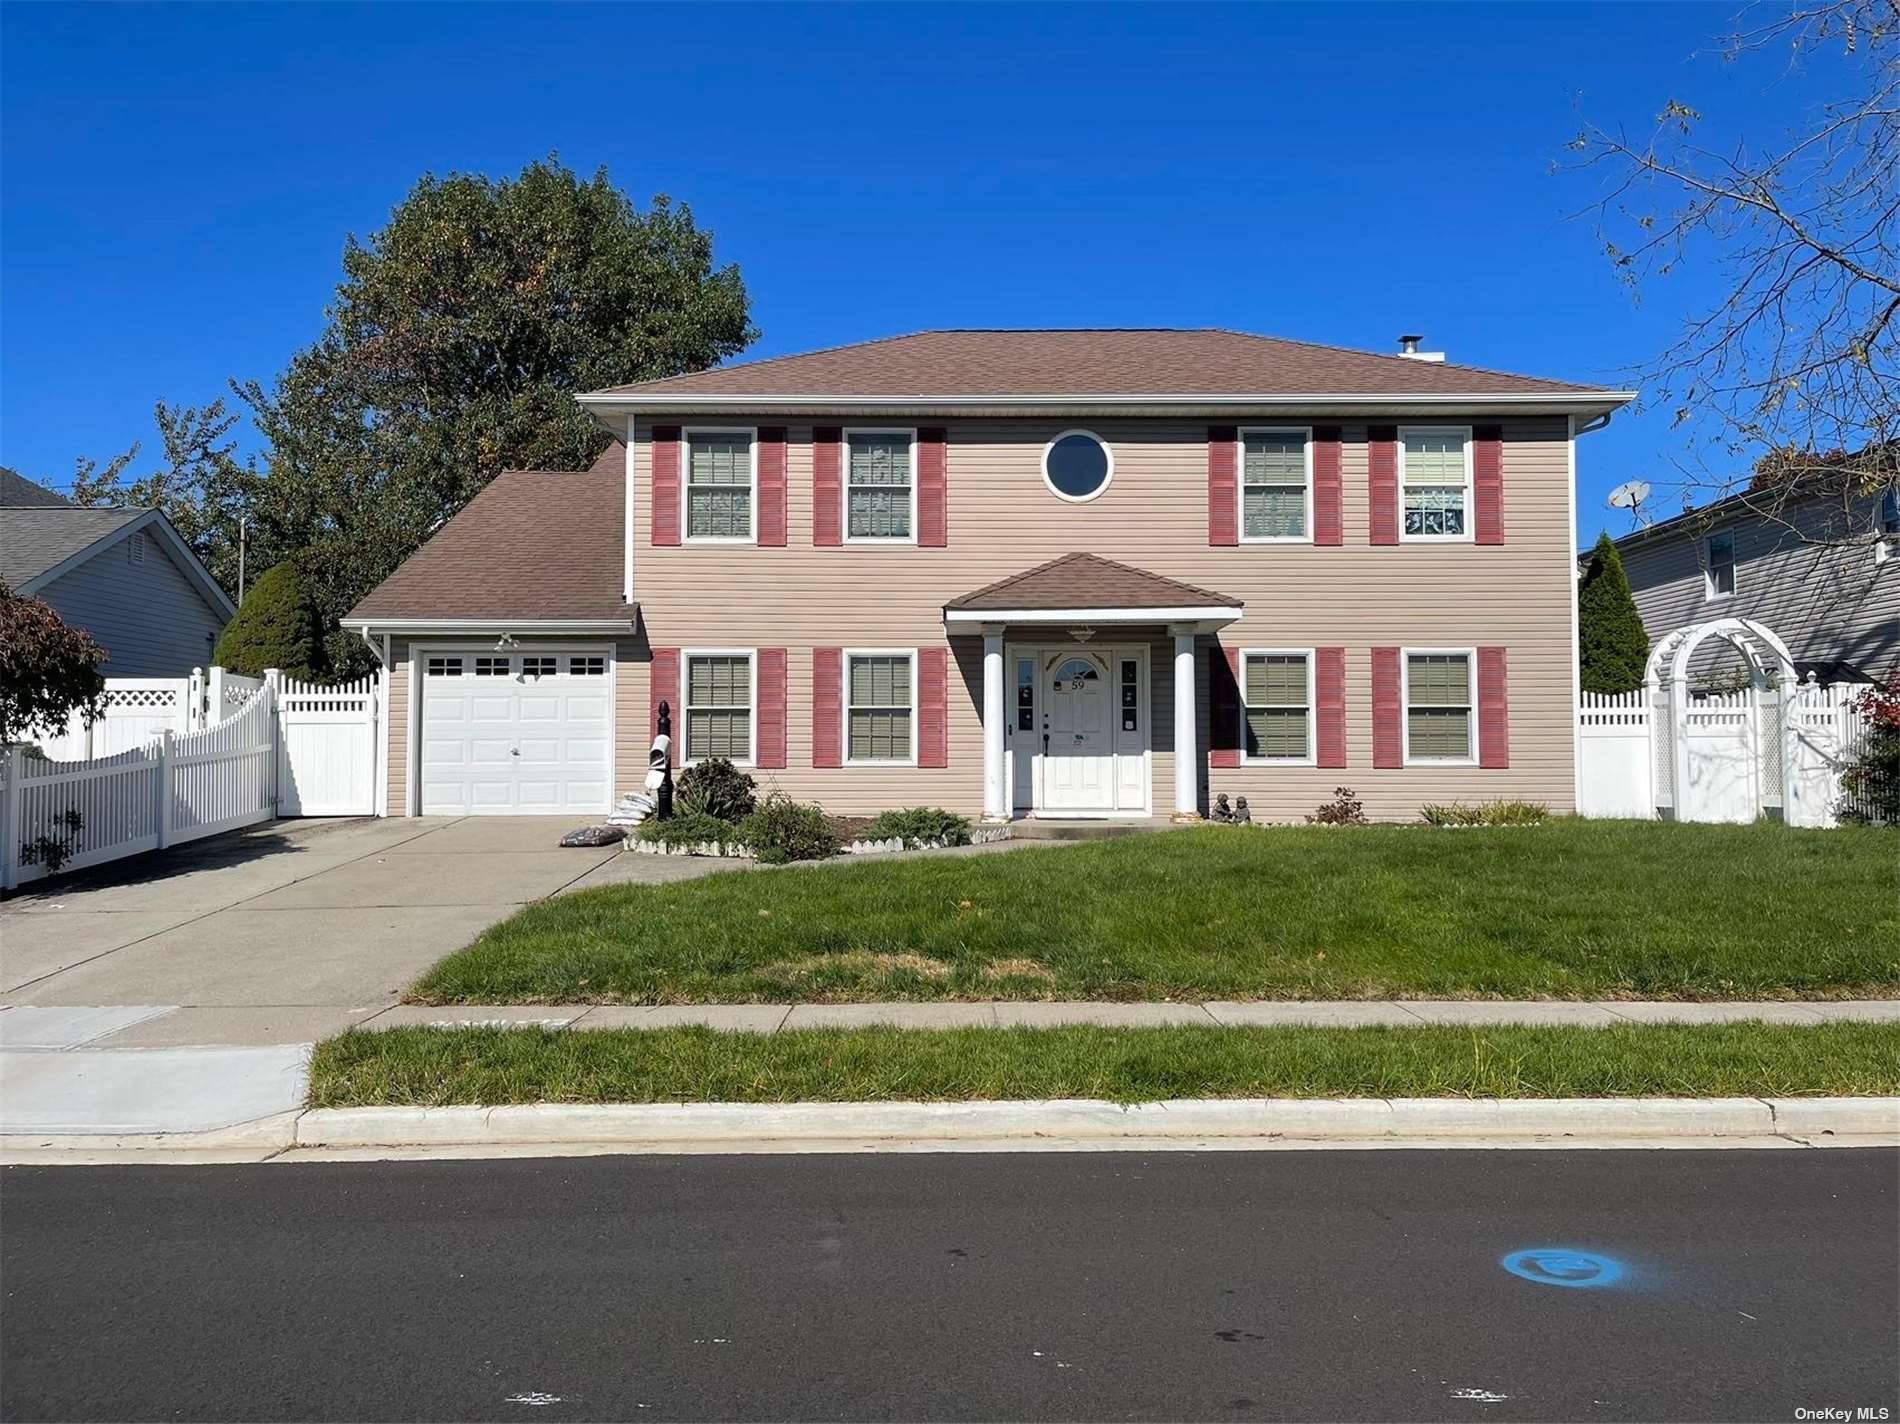 Presenting a wonderful opportunity in a desirable neighborhood, this 5 bedroom, 3 bathroom home is built in 2006, Move in ready condition, Situated in an award winning school district.